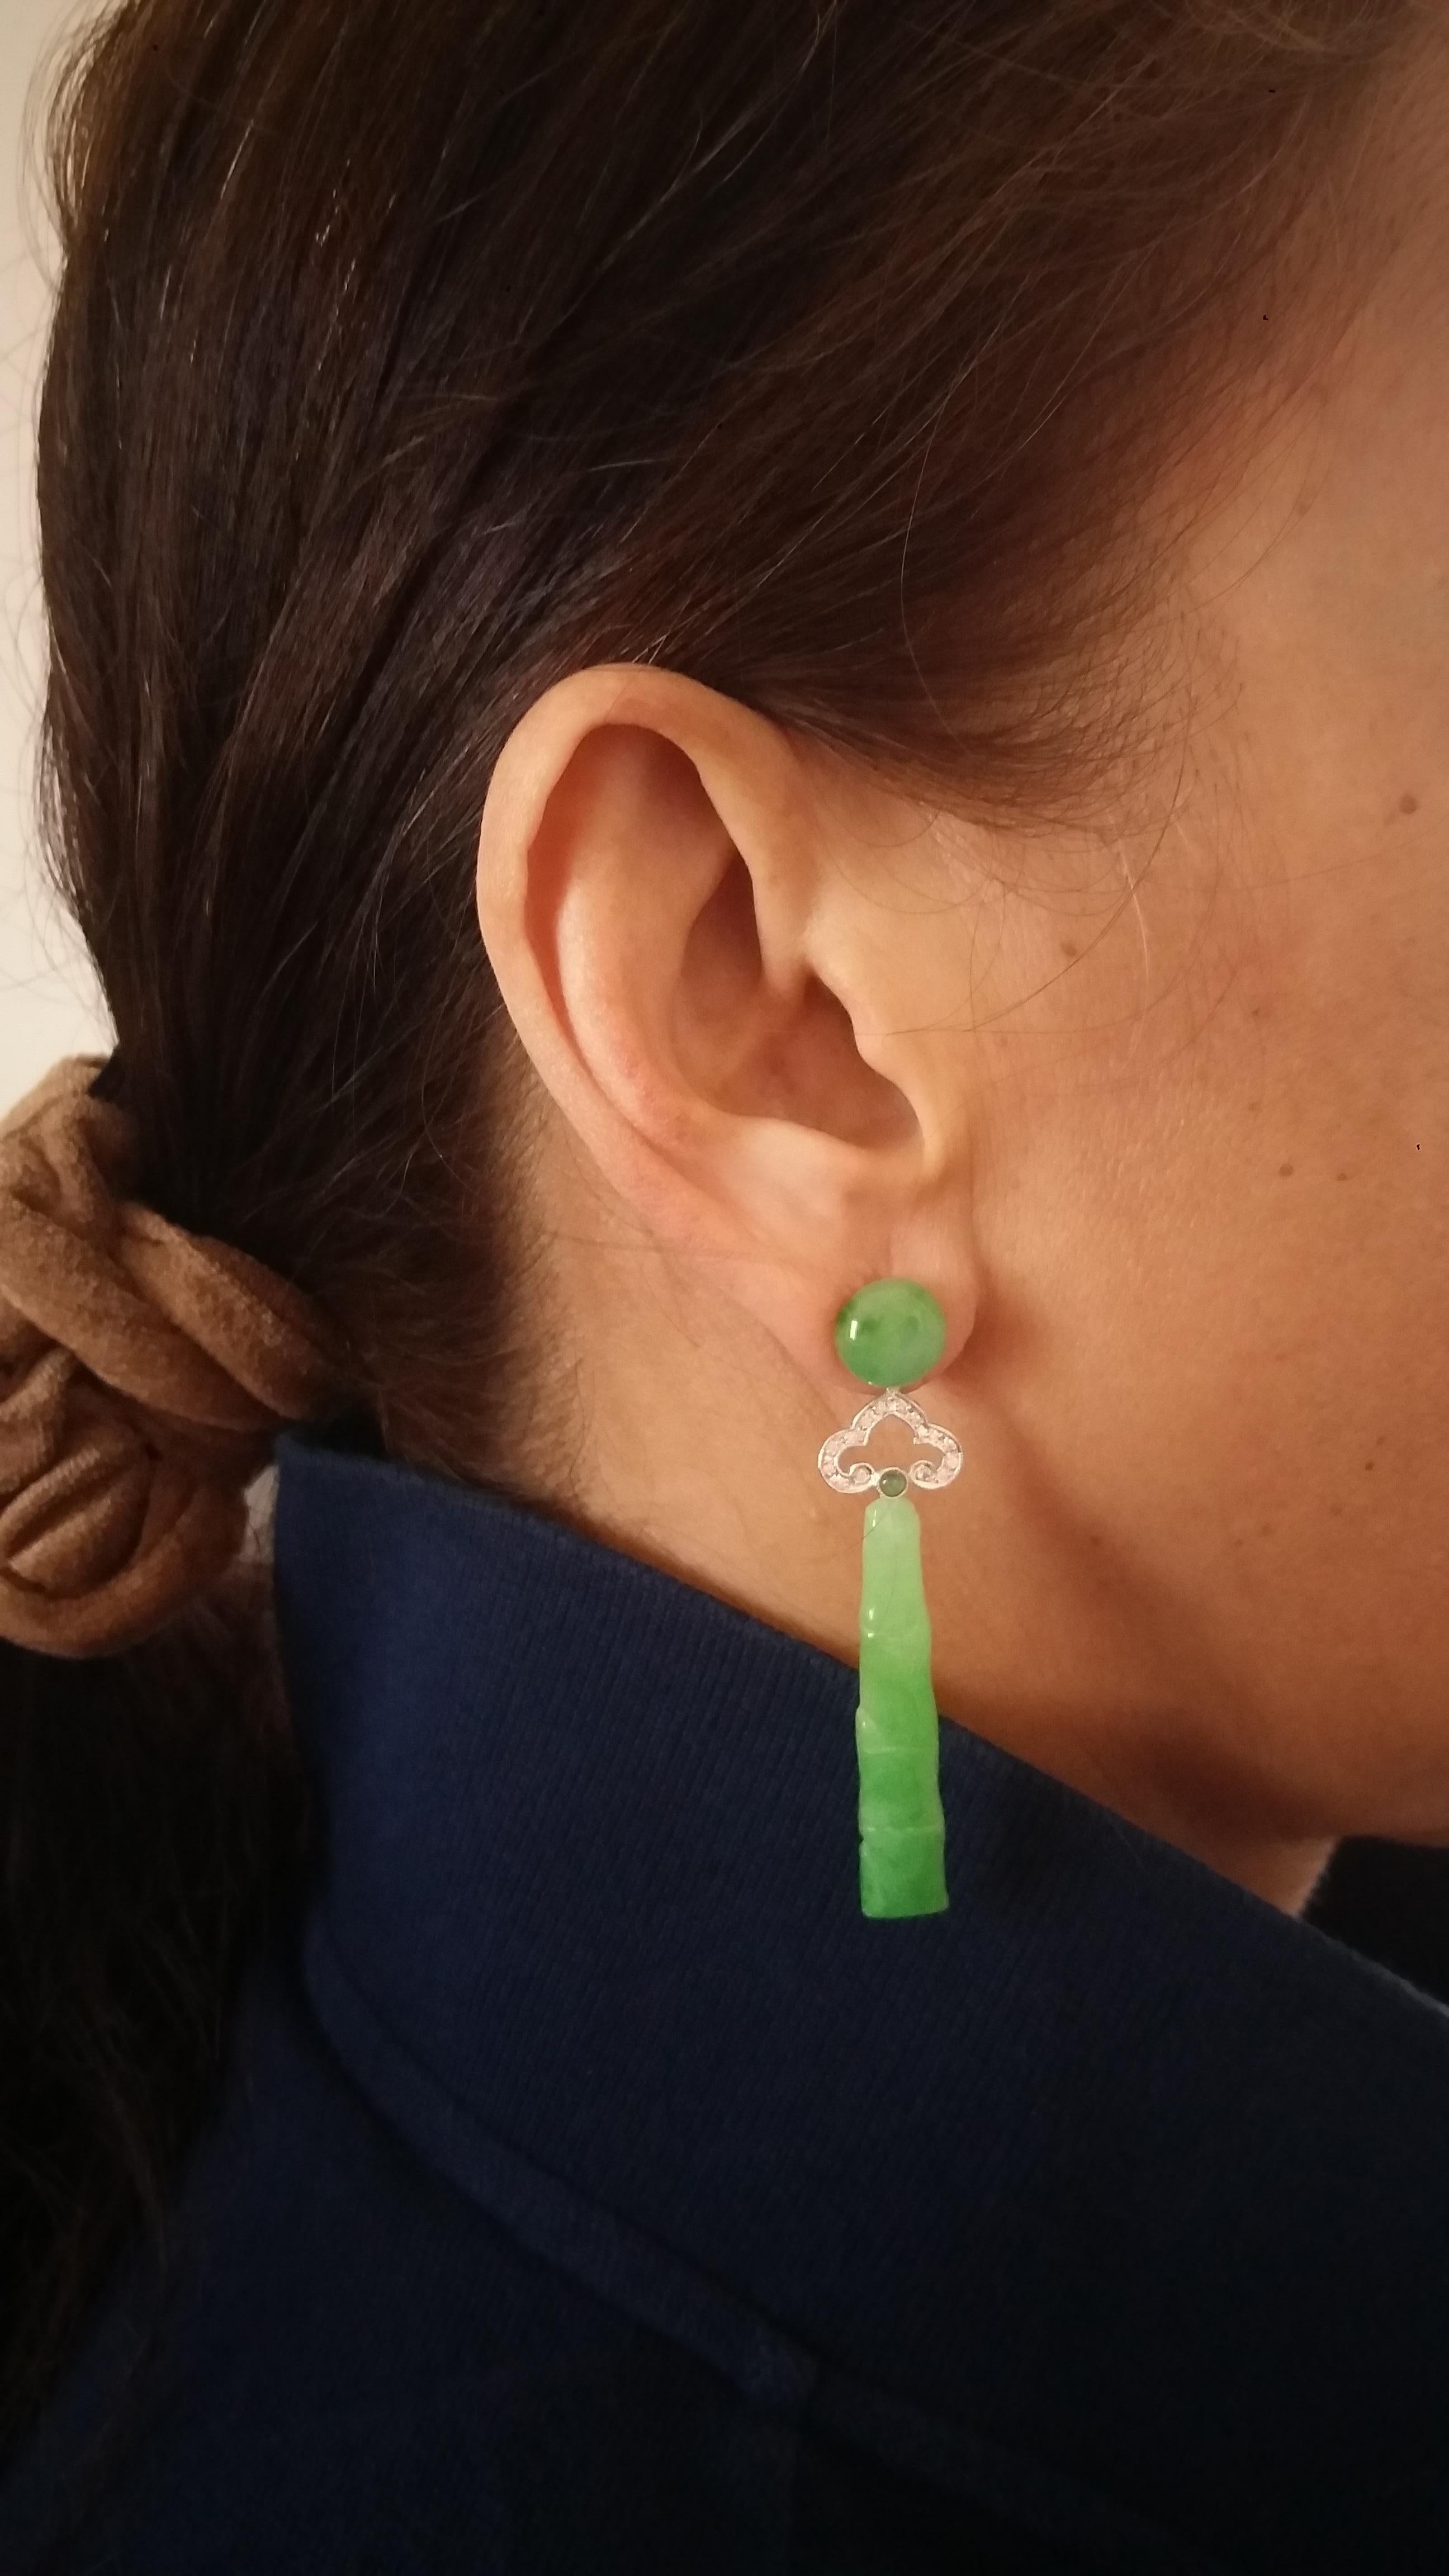 Art deco style earrings composed of 2 jade buttons at the top that support 2 white gold and diamonds elements and 2 jade engraved in bamboo shape
In 1978 our workshop started in Italy to make simple-chic Art Deco style jewellery, completely handmade